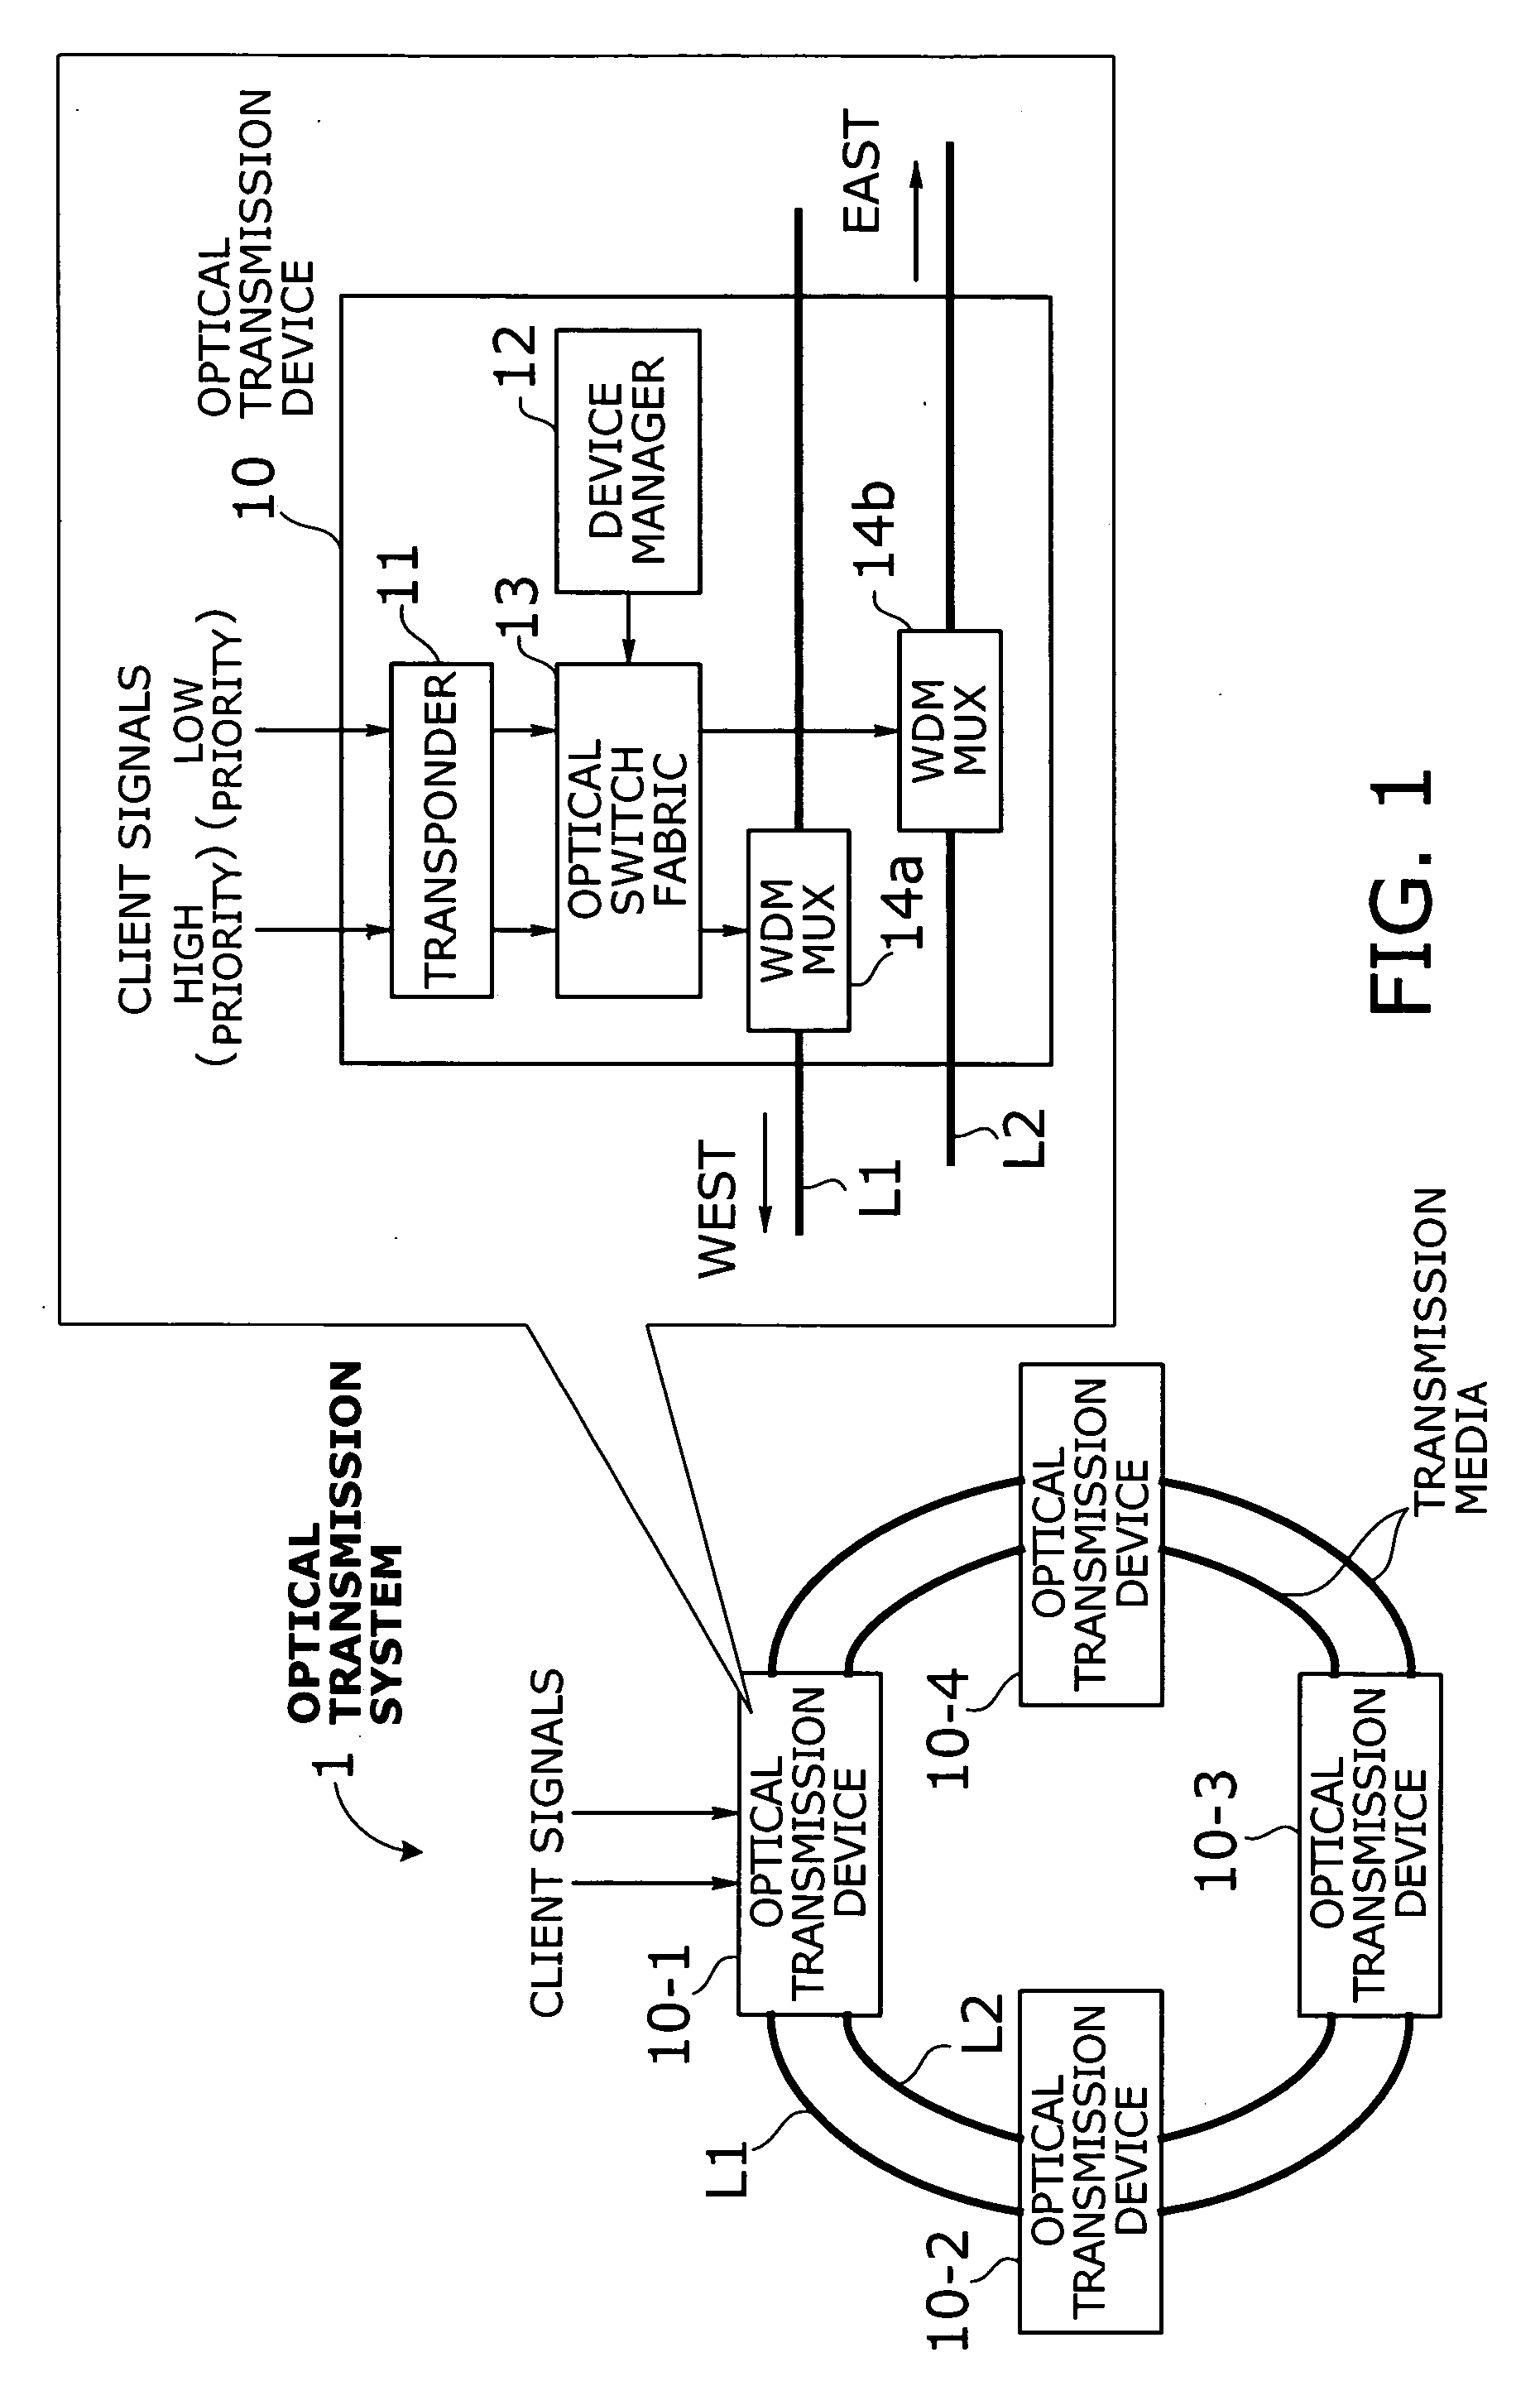 Optical transmission system with two-mode ring protection mechanism for prioritized client signals